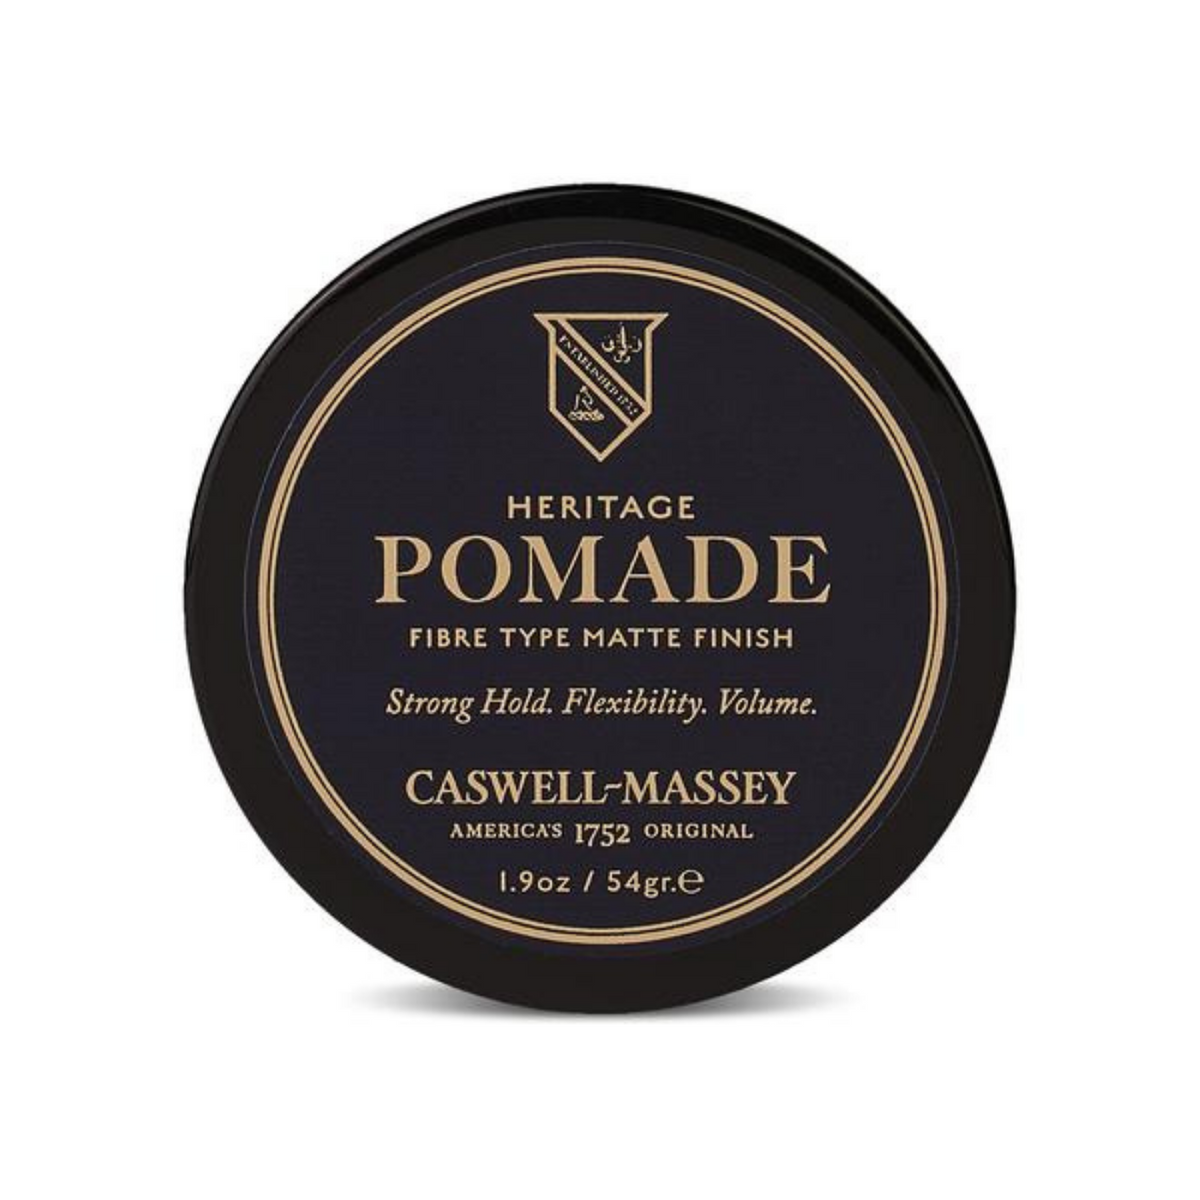 Primary Image of Heritage Fibre Matte Pomade